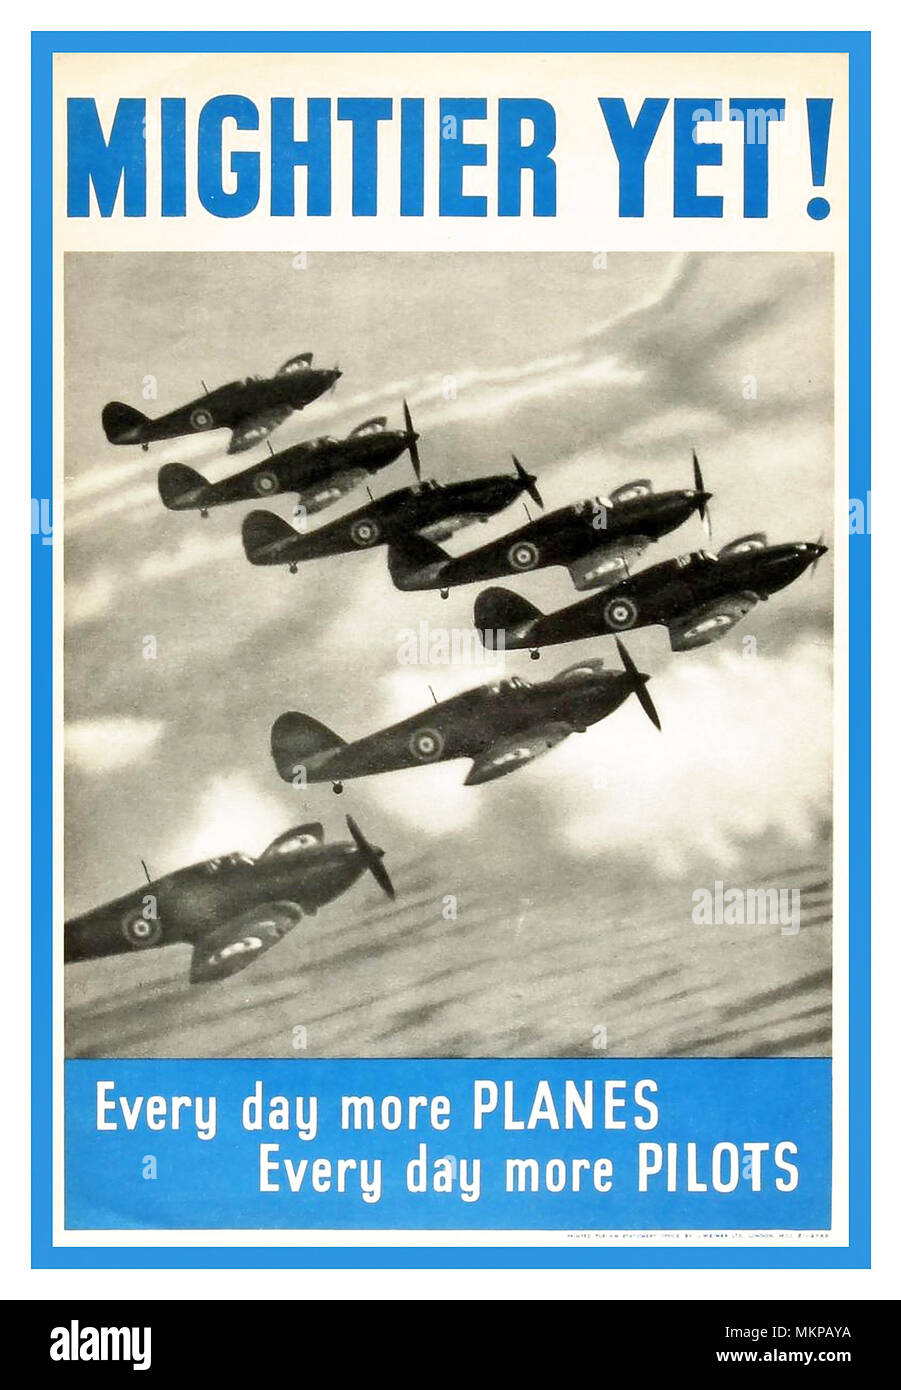 Vintage UK SPITFIRE FORMATION RAF POSTER 1940's WW2 RAF British Propaganda Recruitment Poster  'Mightier Yet !' (Title from 'Elgar's LAND OF HOPE AND GLORY)  'Every day more PLANES'  'Every day more PILOTS'  Squadron of Spitfire Aircraft featured flying in formation..The Battle of Britain World War II Second World War Stock Photo